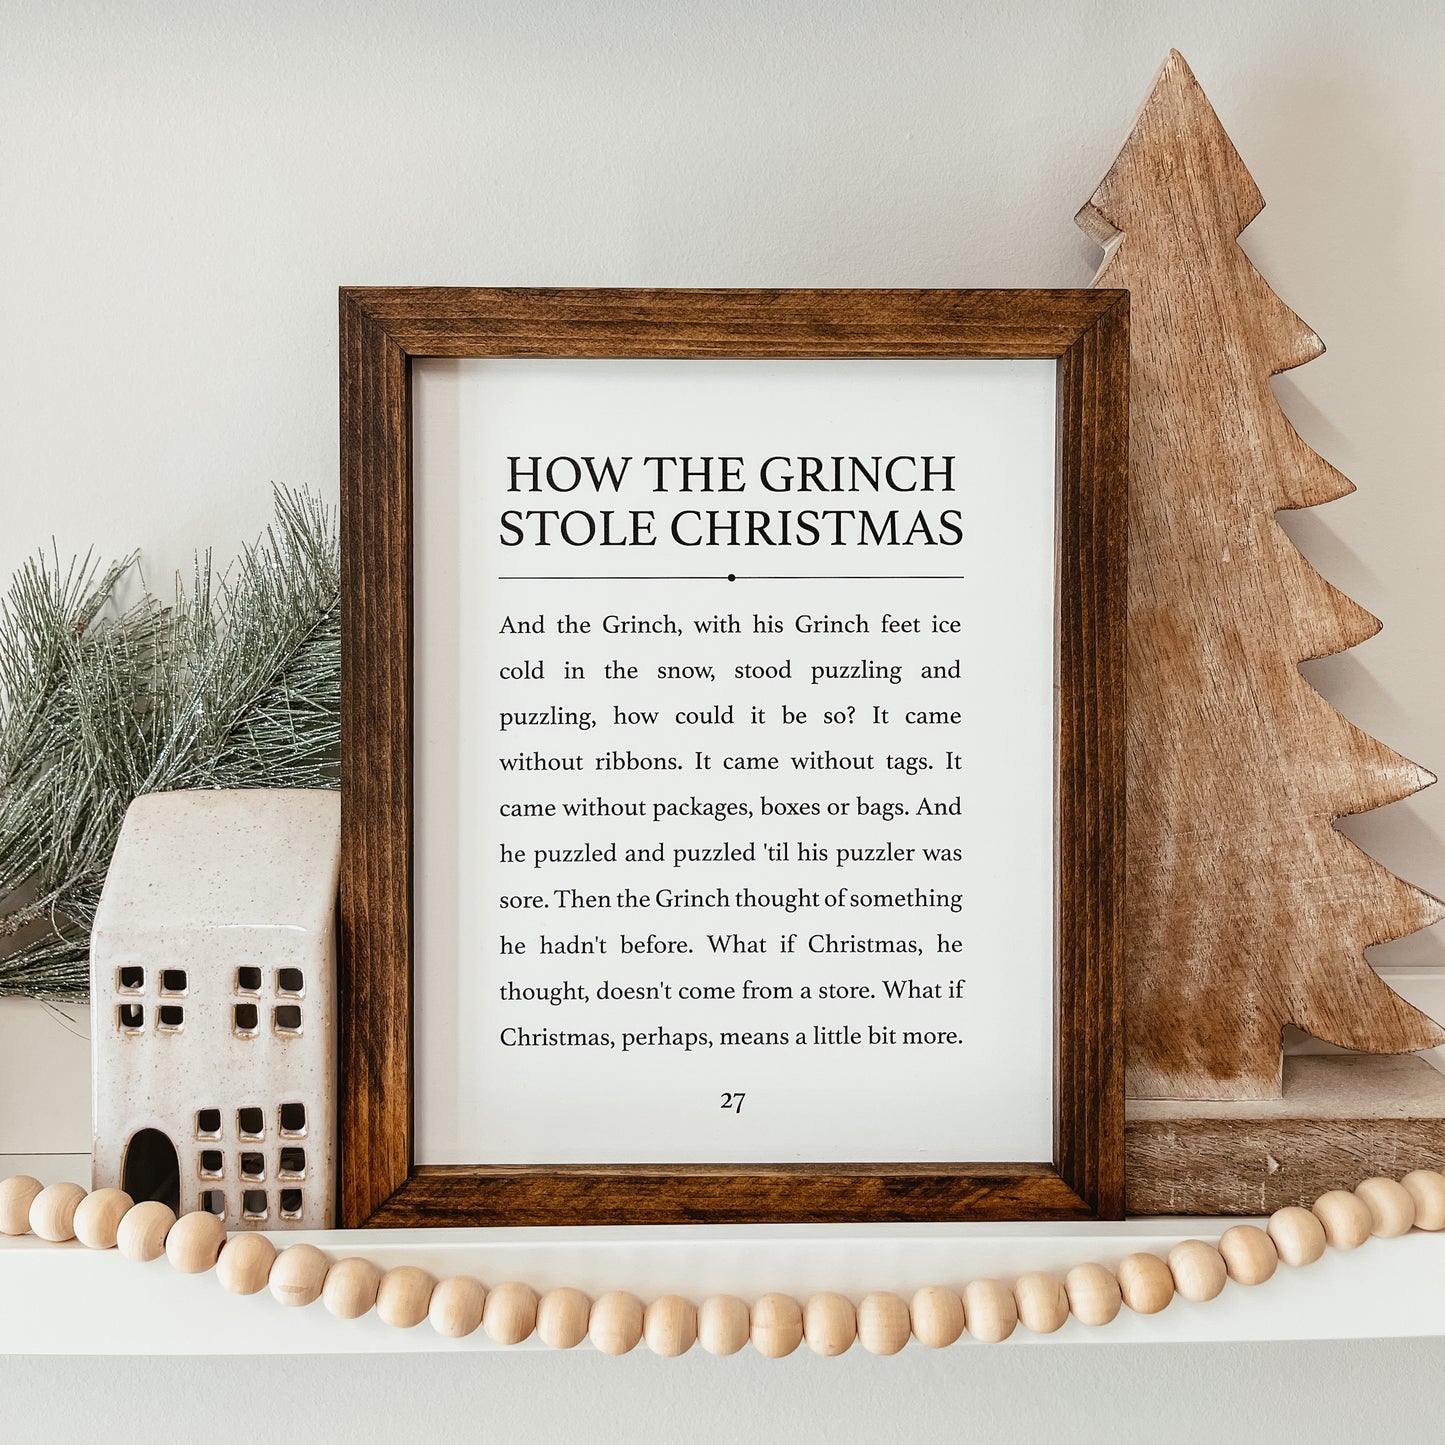 How The Grinch Stole Christmas Framed Sign